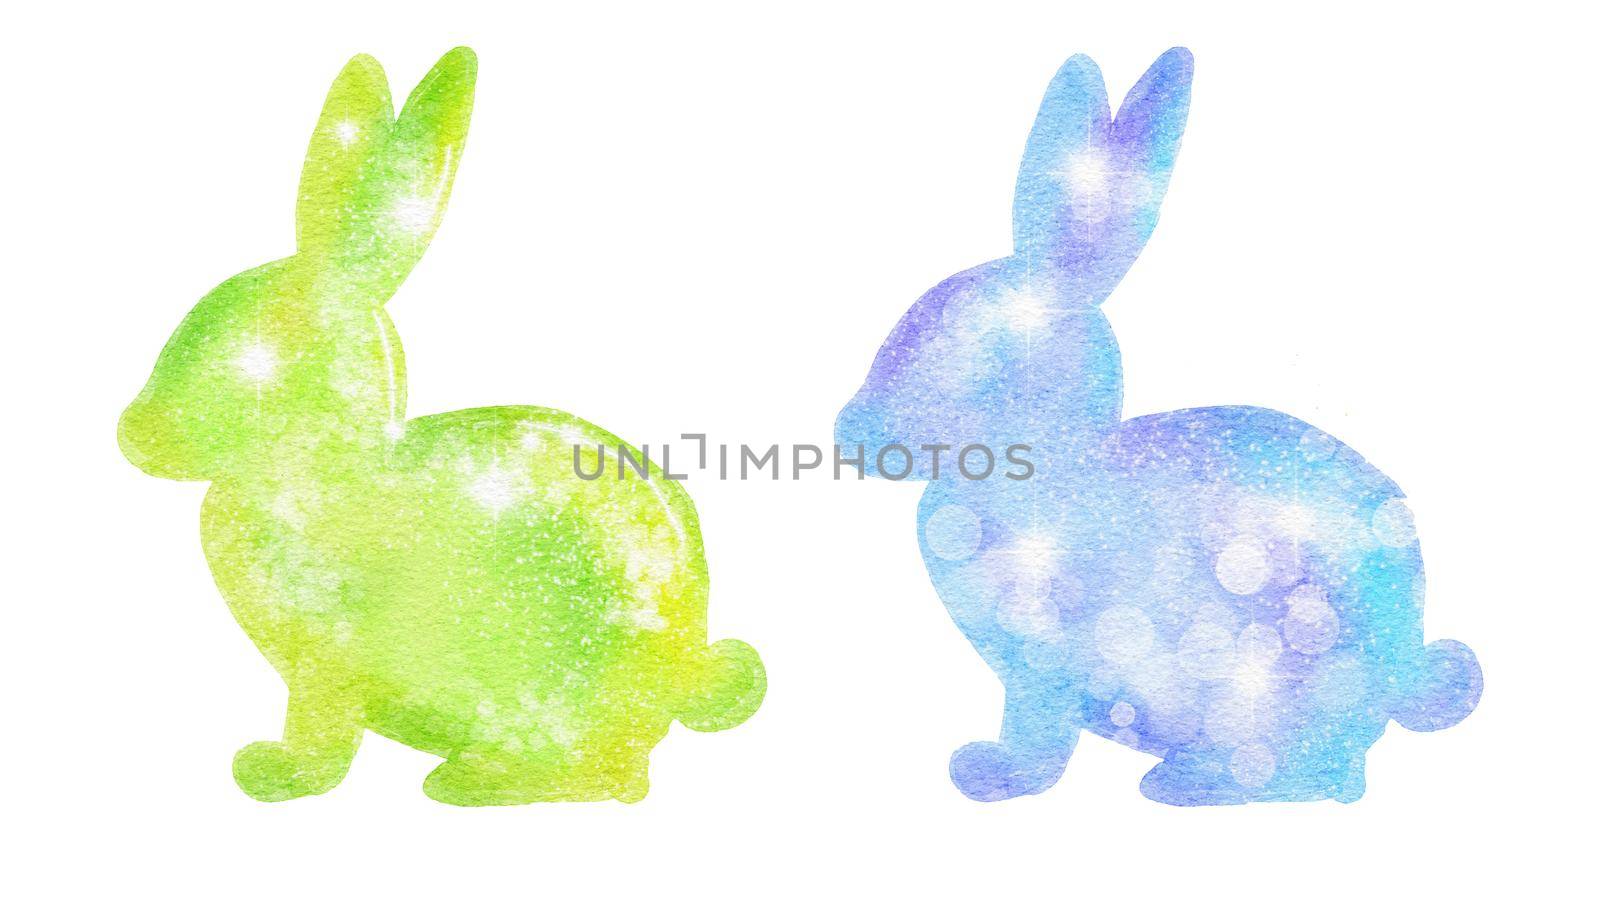 Watercolor Easter bunnies rabbits with shiny shimmering glitter texture, pastel colors green blue design. April spring religious celebration, for cards invitations prints. by Lagmar